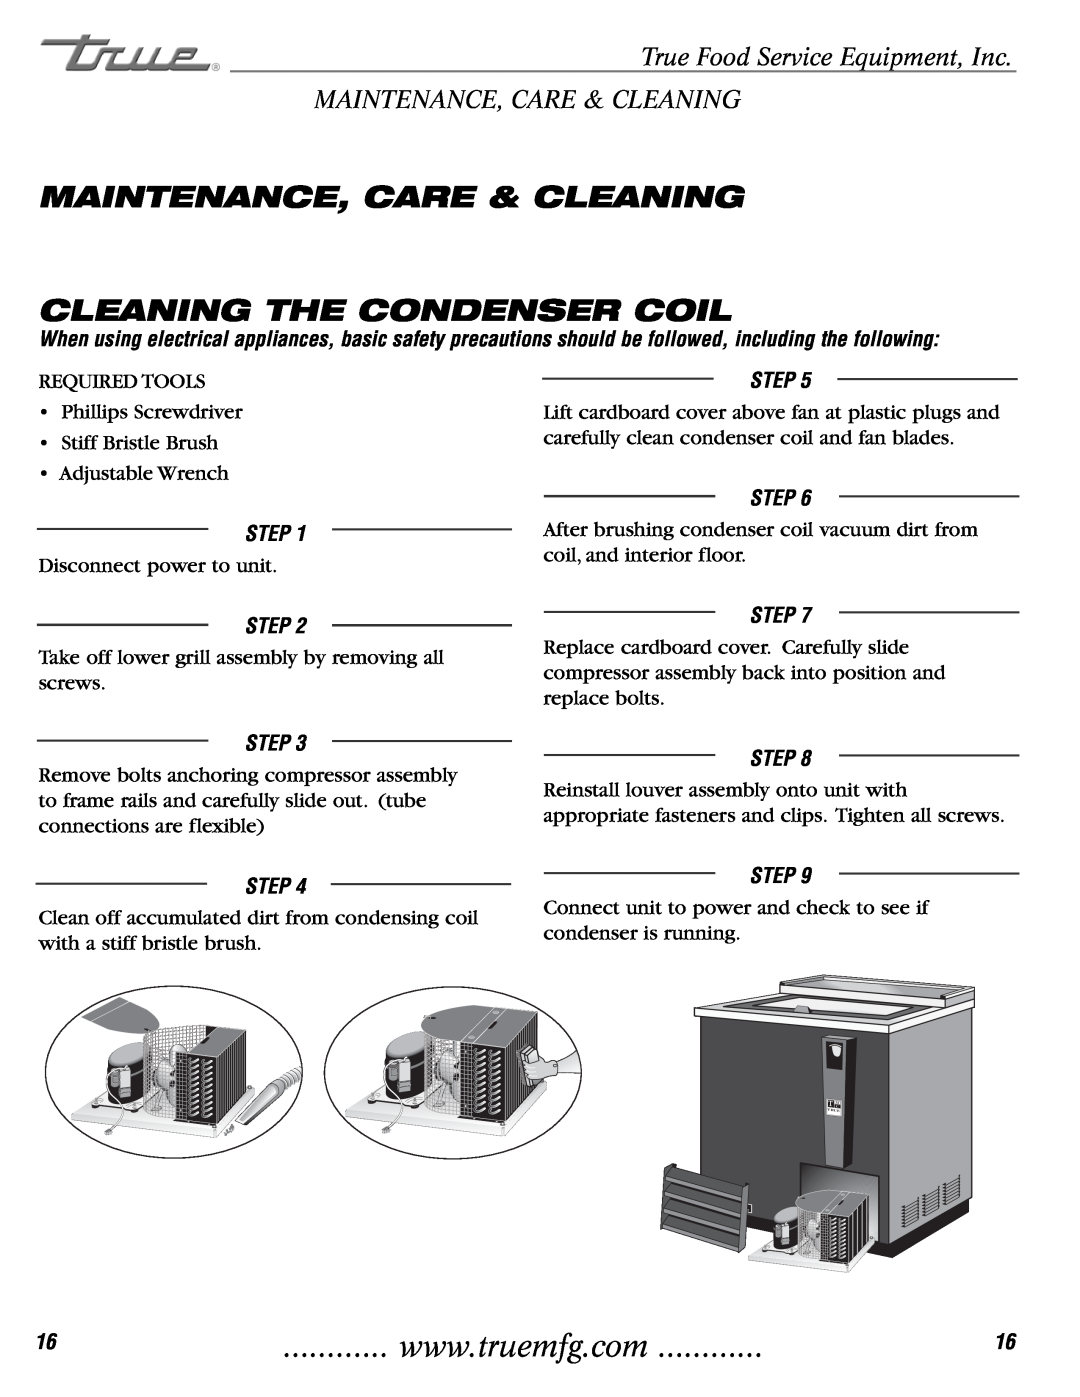 True Manufacturing Company TBB-3G-S, TD-50-18-S-LT, TDD-4 Maintenance, Care & Cleaning Cleaning The Condenser Coil, Step 